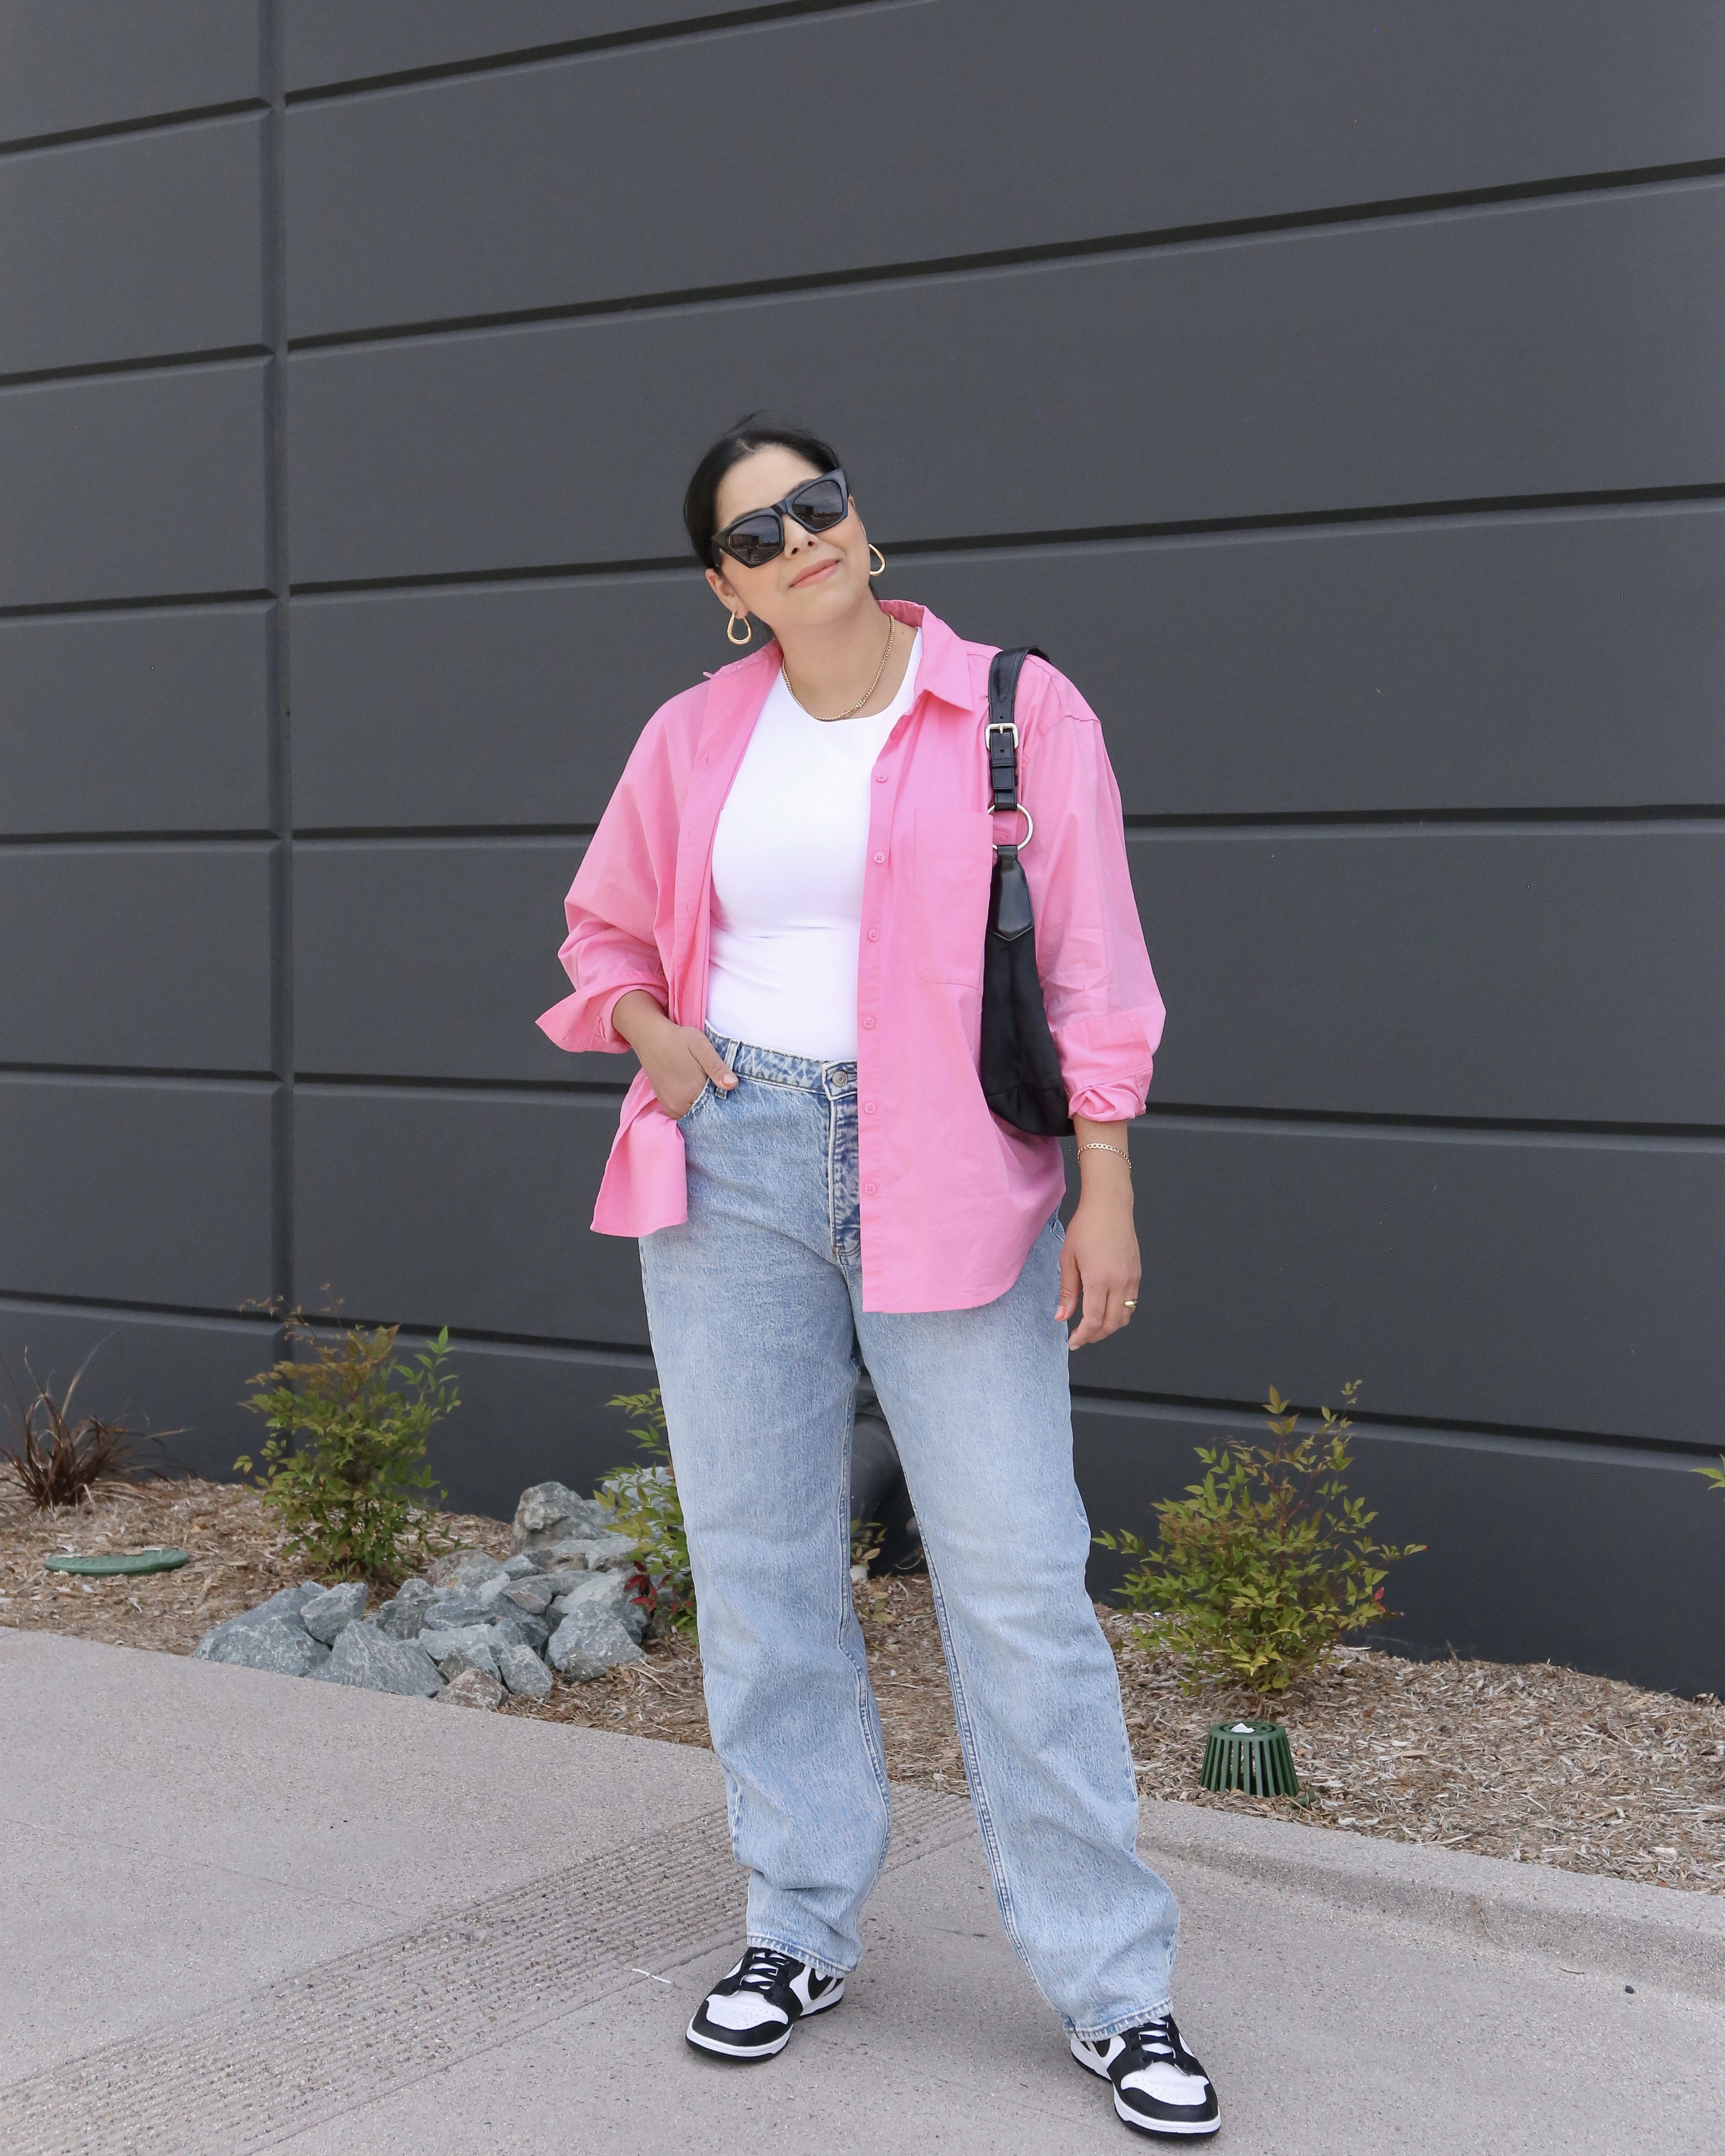 Casual Women's Outfit with baggy jeans - Lil bits of Chic